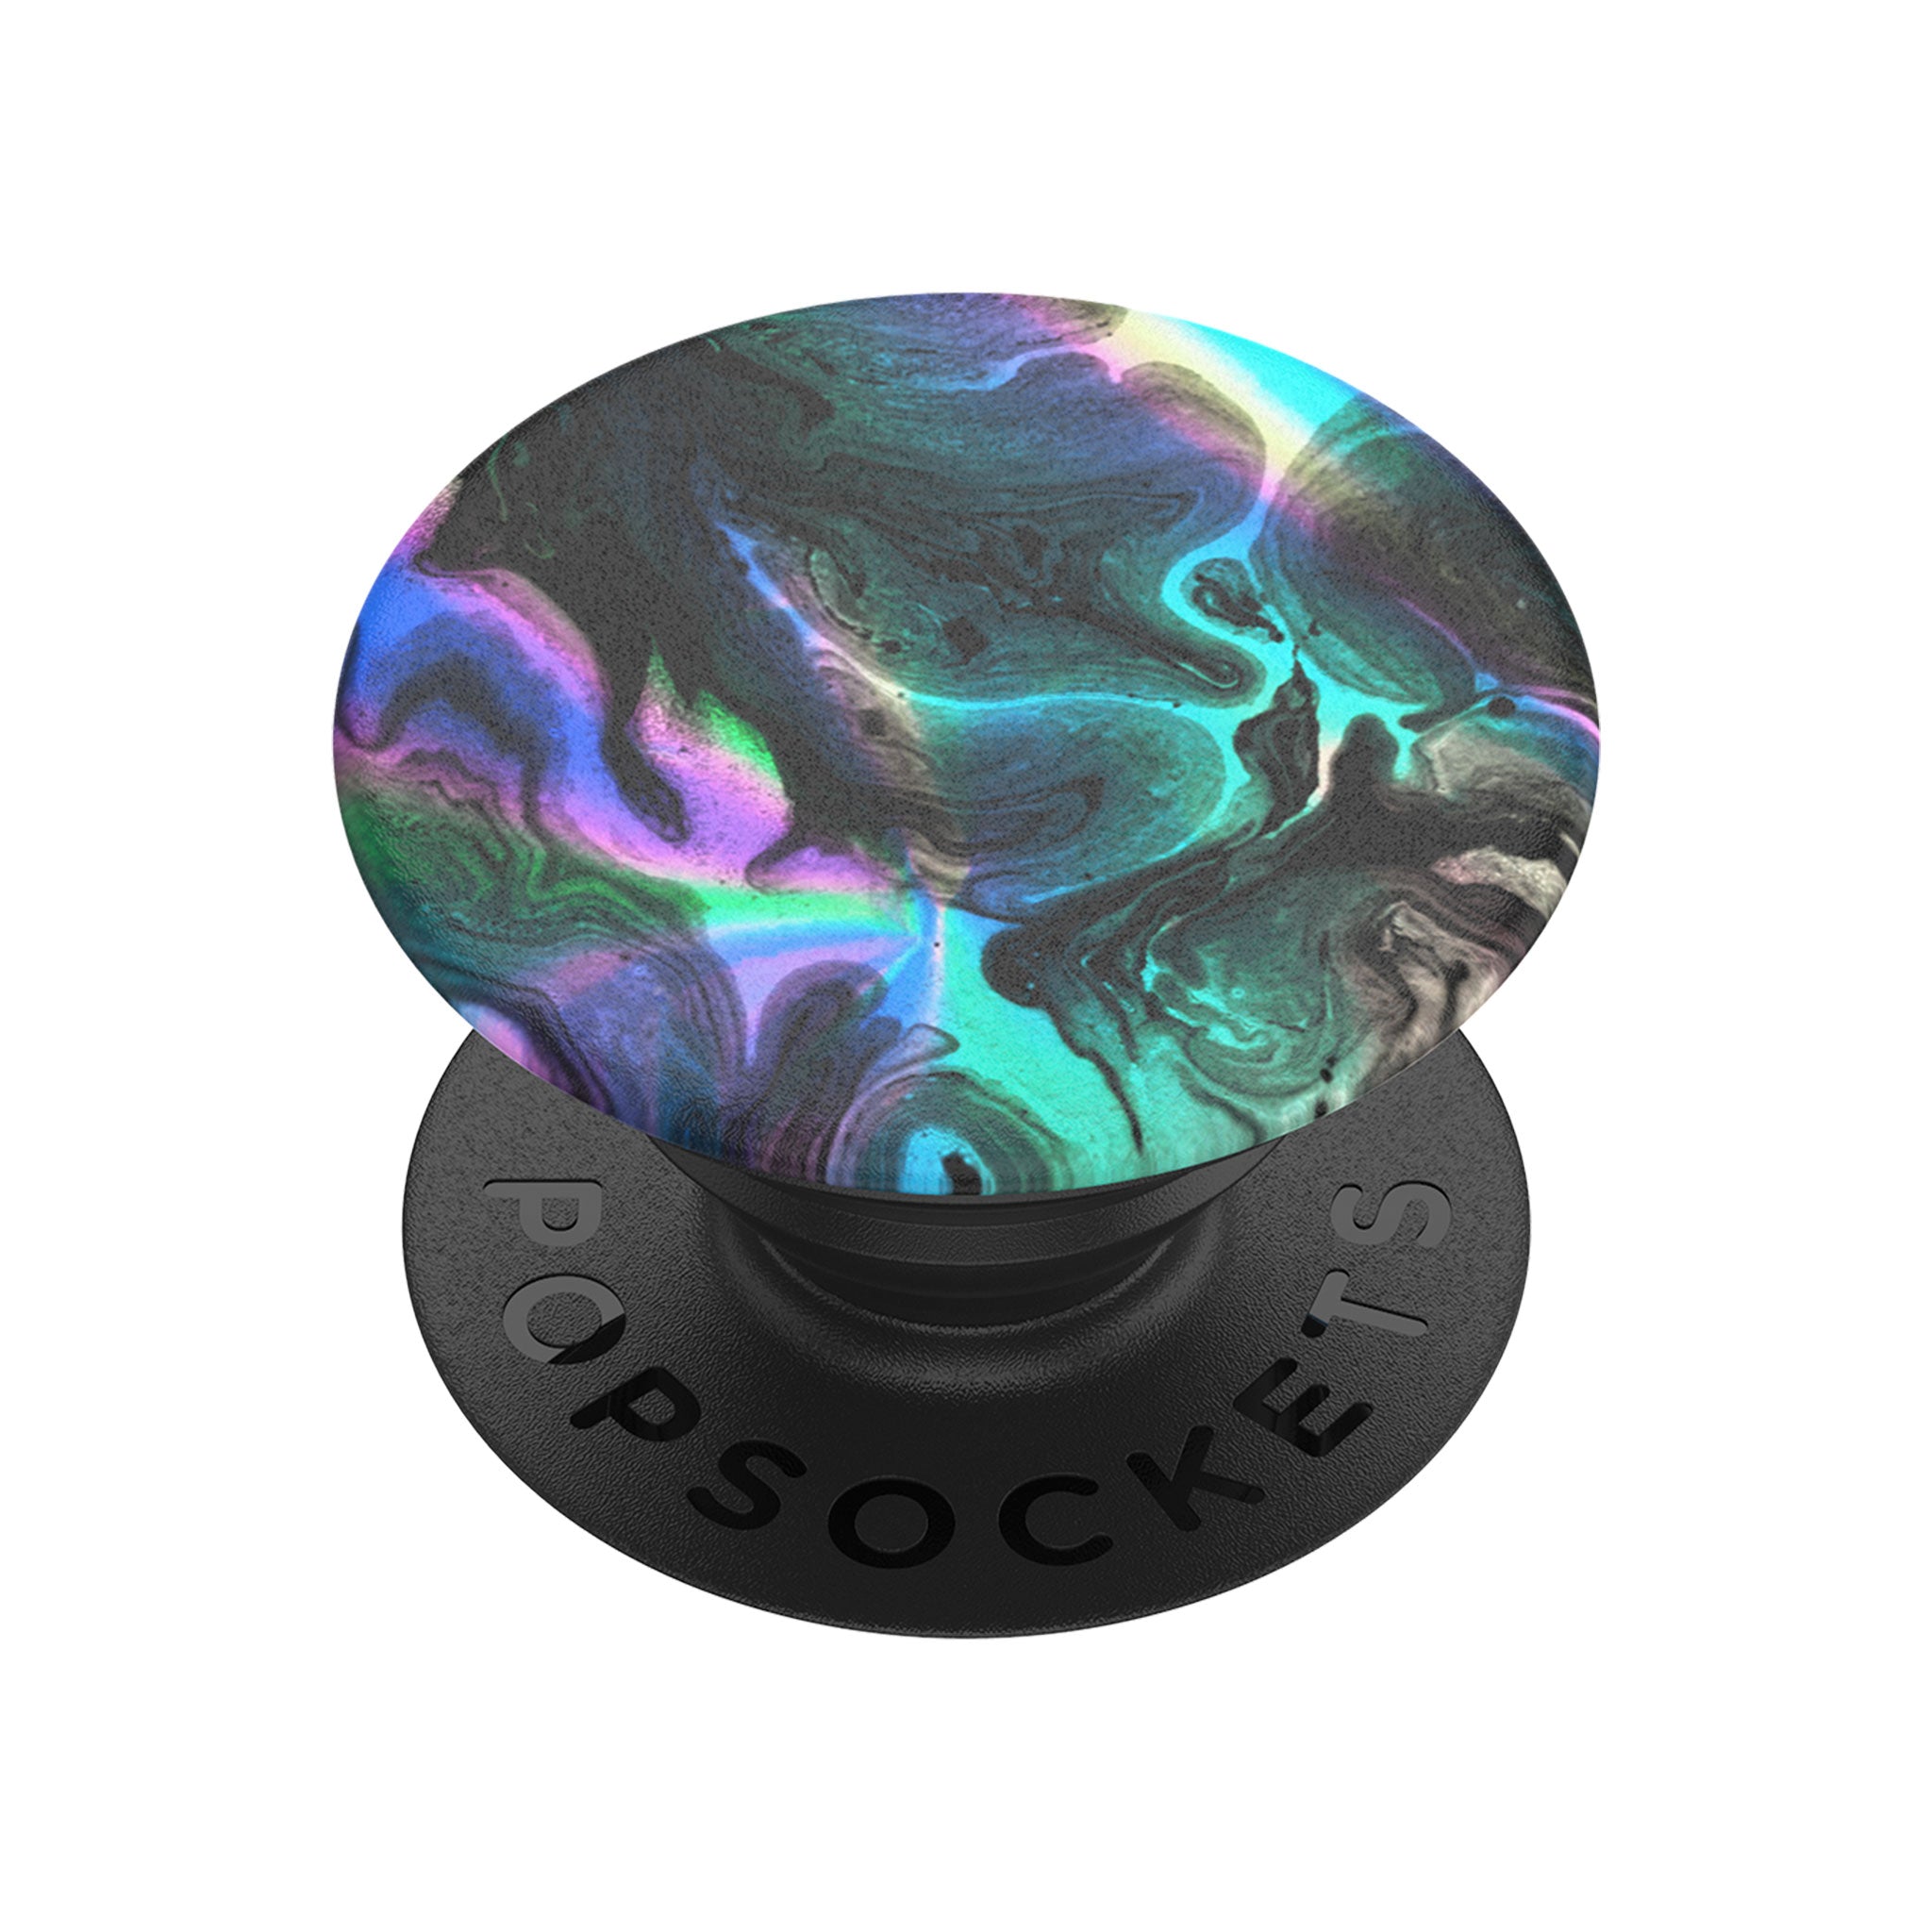 Popsockets - Popgrip - Oil Agate